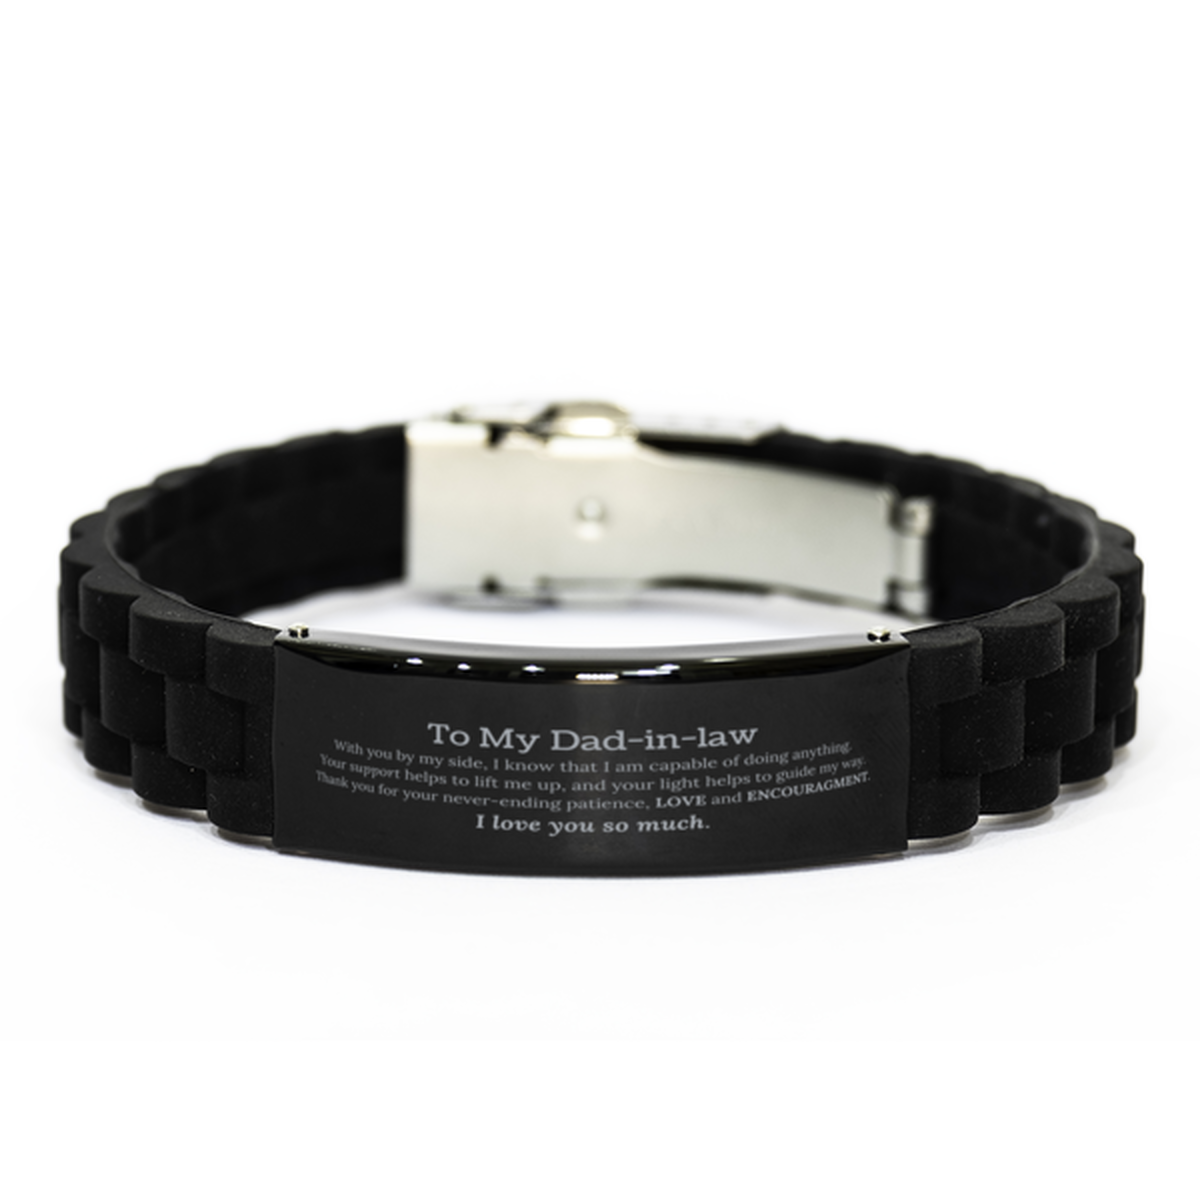 Appreciation Dad-in-law Black Glidelock Clasp Bracelet Gifts, To My Dad-in-law Birthday Christmas Wedding Keepsake Gifts for Dad-in-law With you by my side, I know that I am capable of doing anything. I love you so much